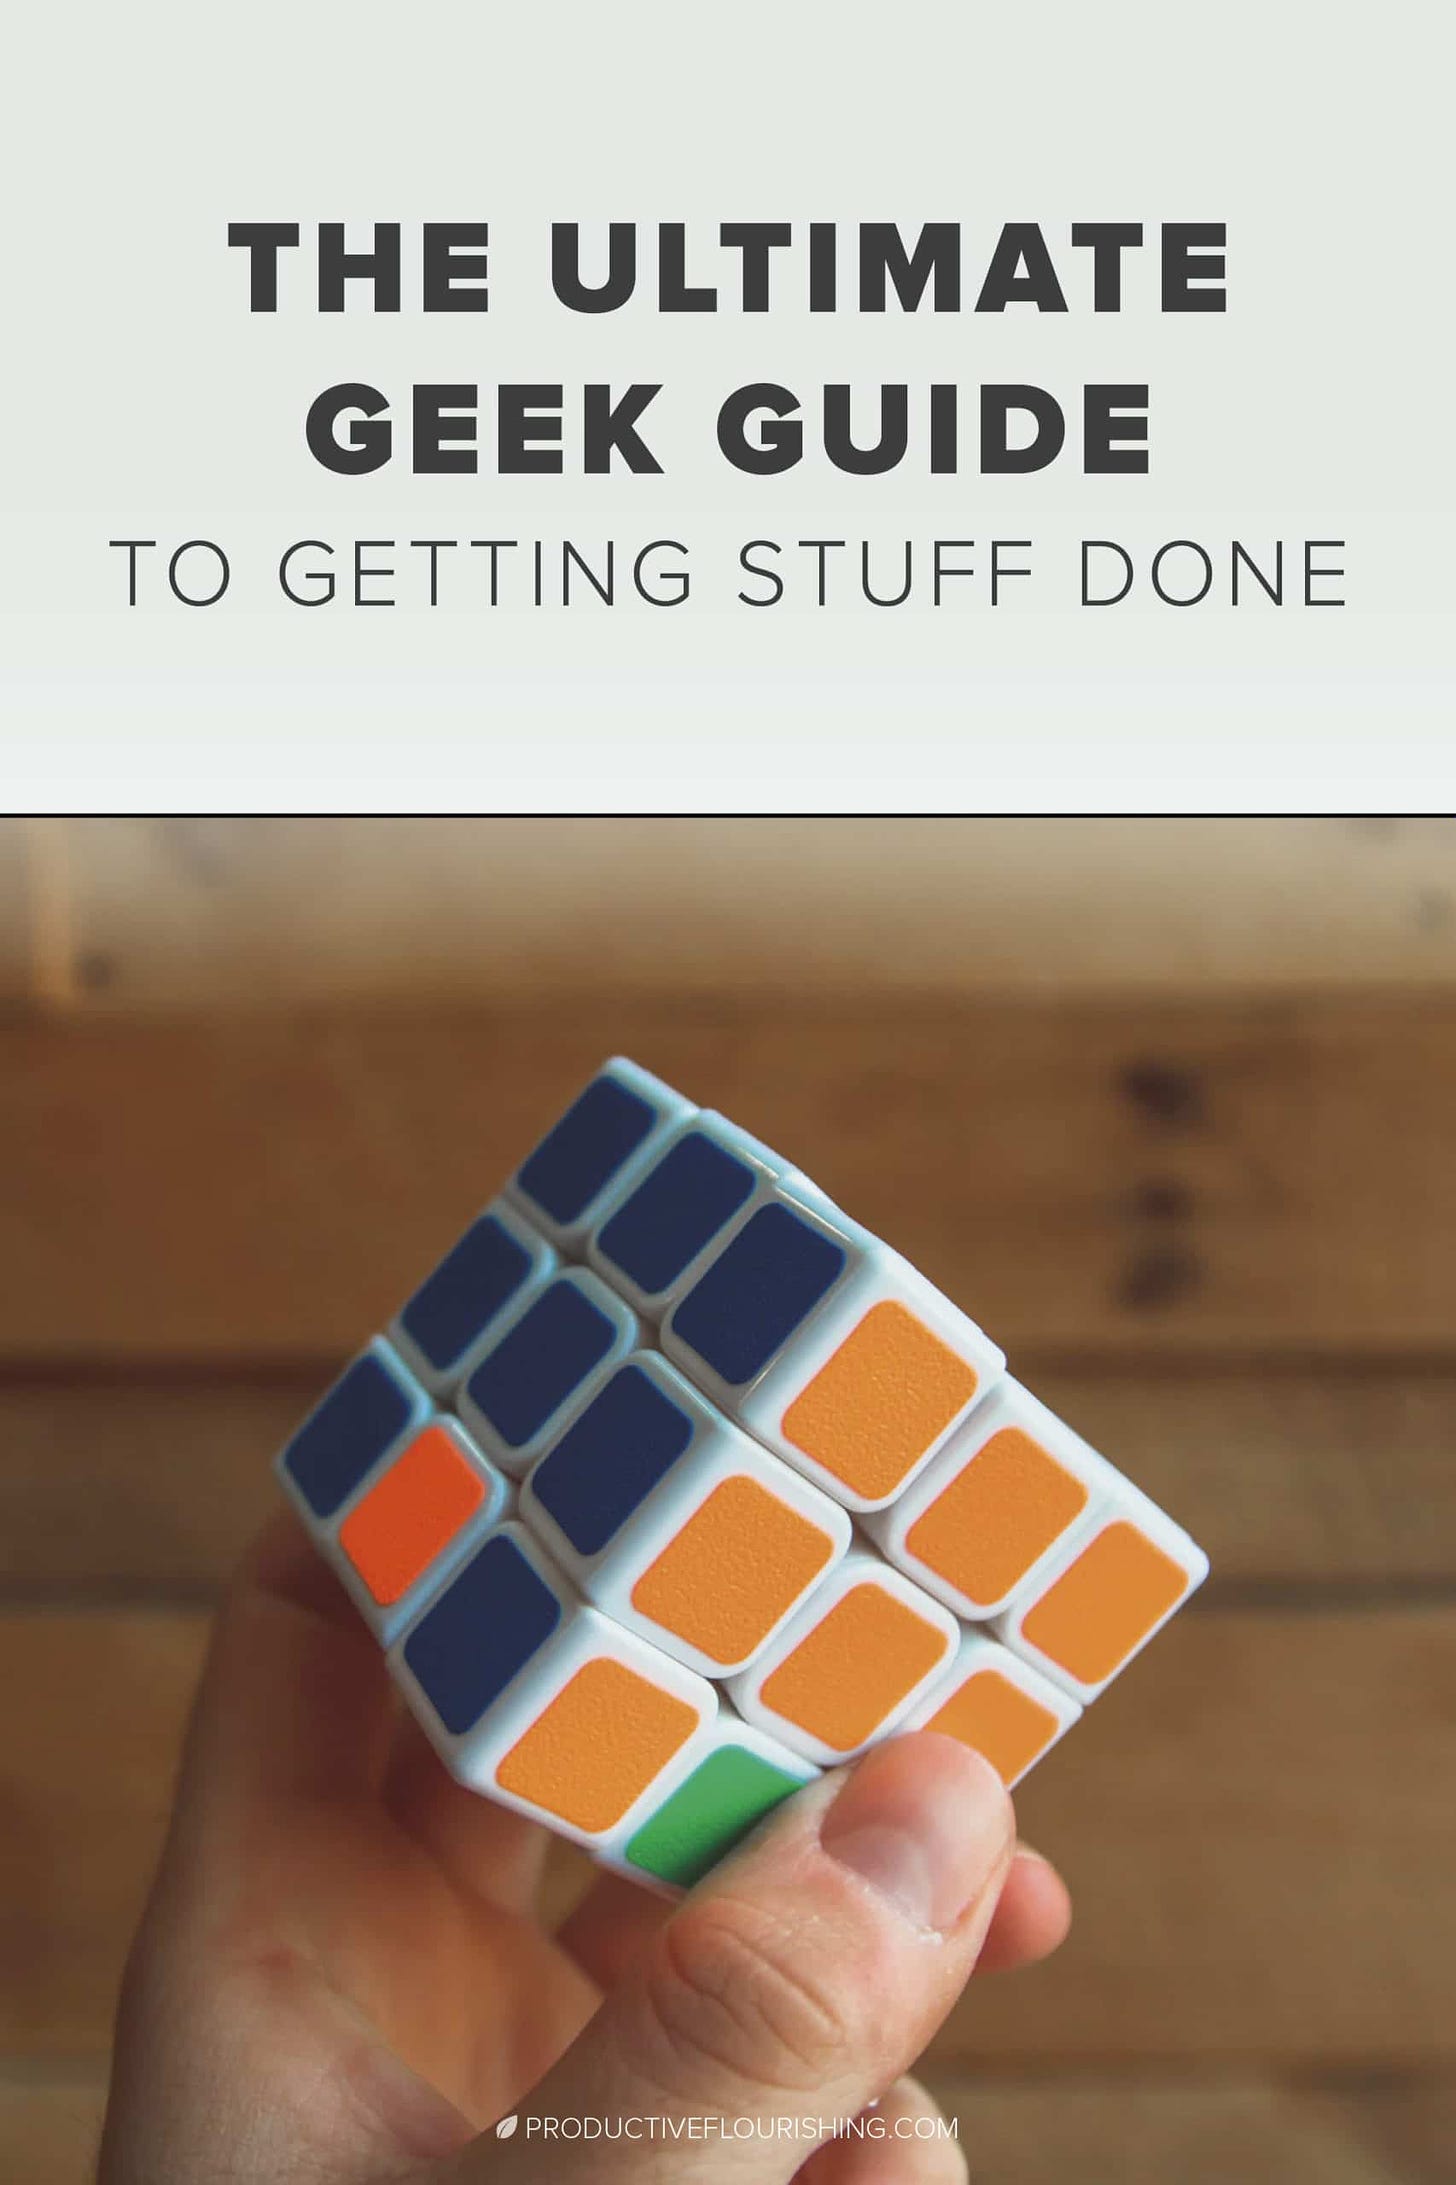 The Ultimate Geek Guide To Getting Stuff Done: Gamify your systems, projects, tasks, and needs with this fun and motivational concept by Ryan McRae. Complete with Minions, Henchmen, a Big Bad Evil Genius Nemesis, and the Hero of it all - you! Tips on how to apply role-play gaming into real life productivity. #roleplaygameideas #productivityhacksandtips #productiveflourishing